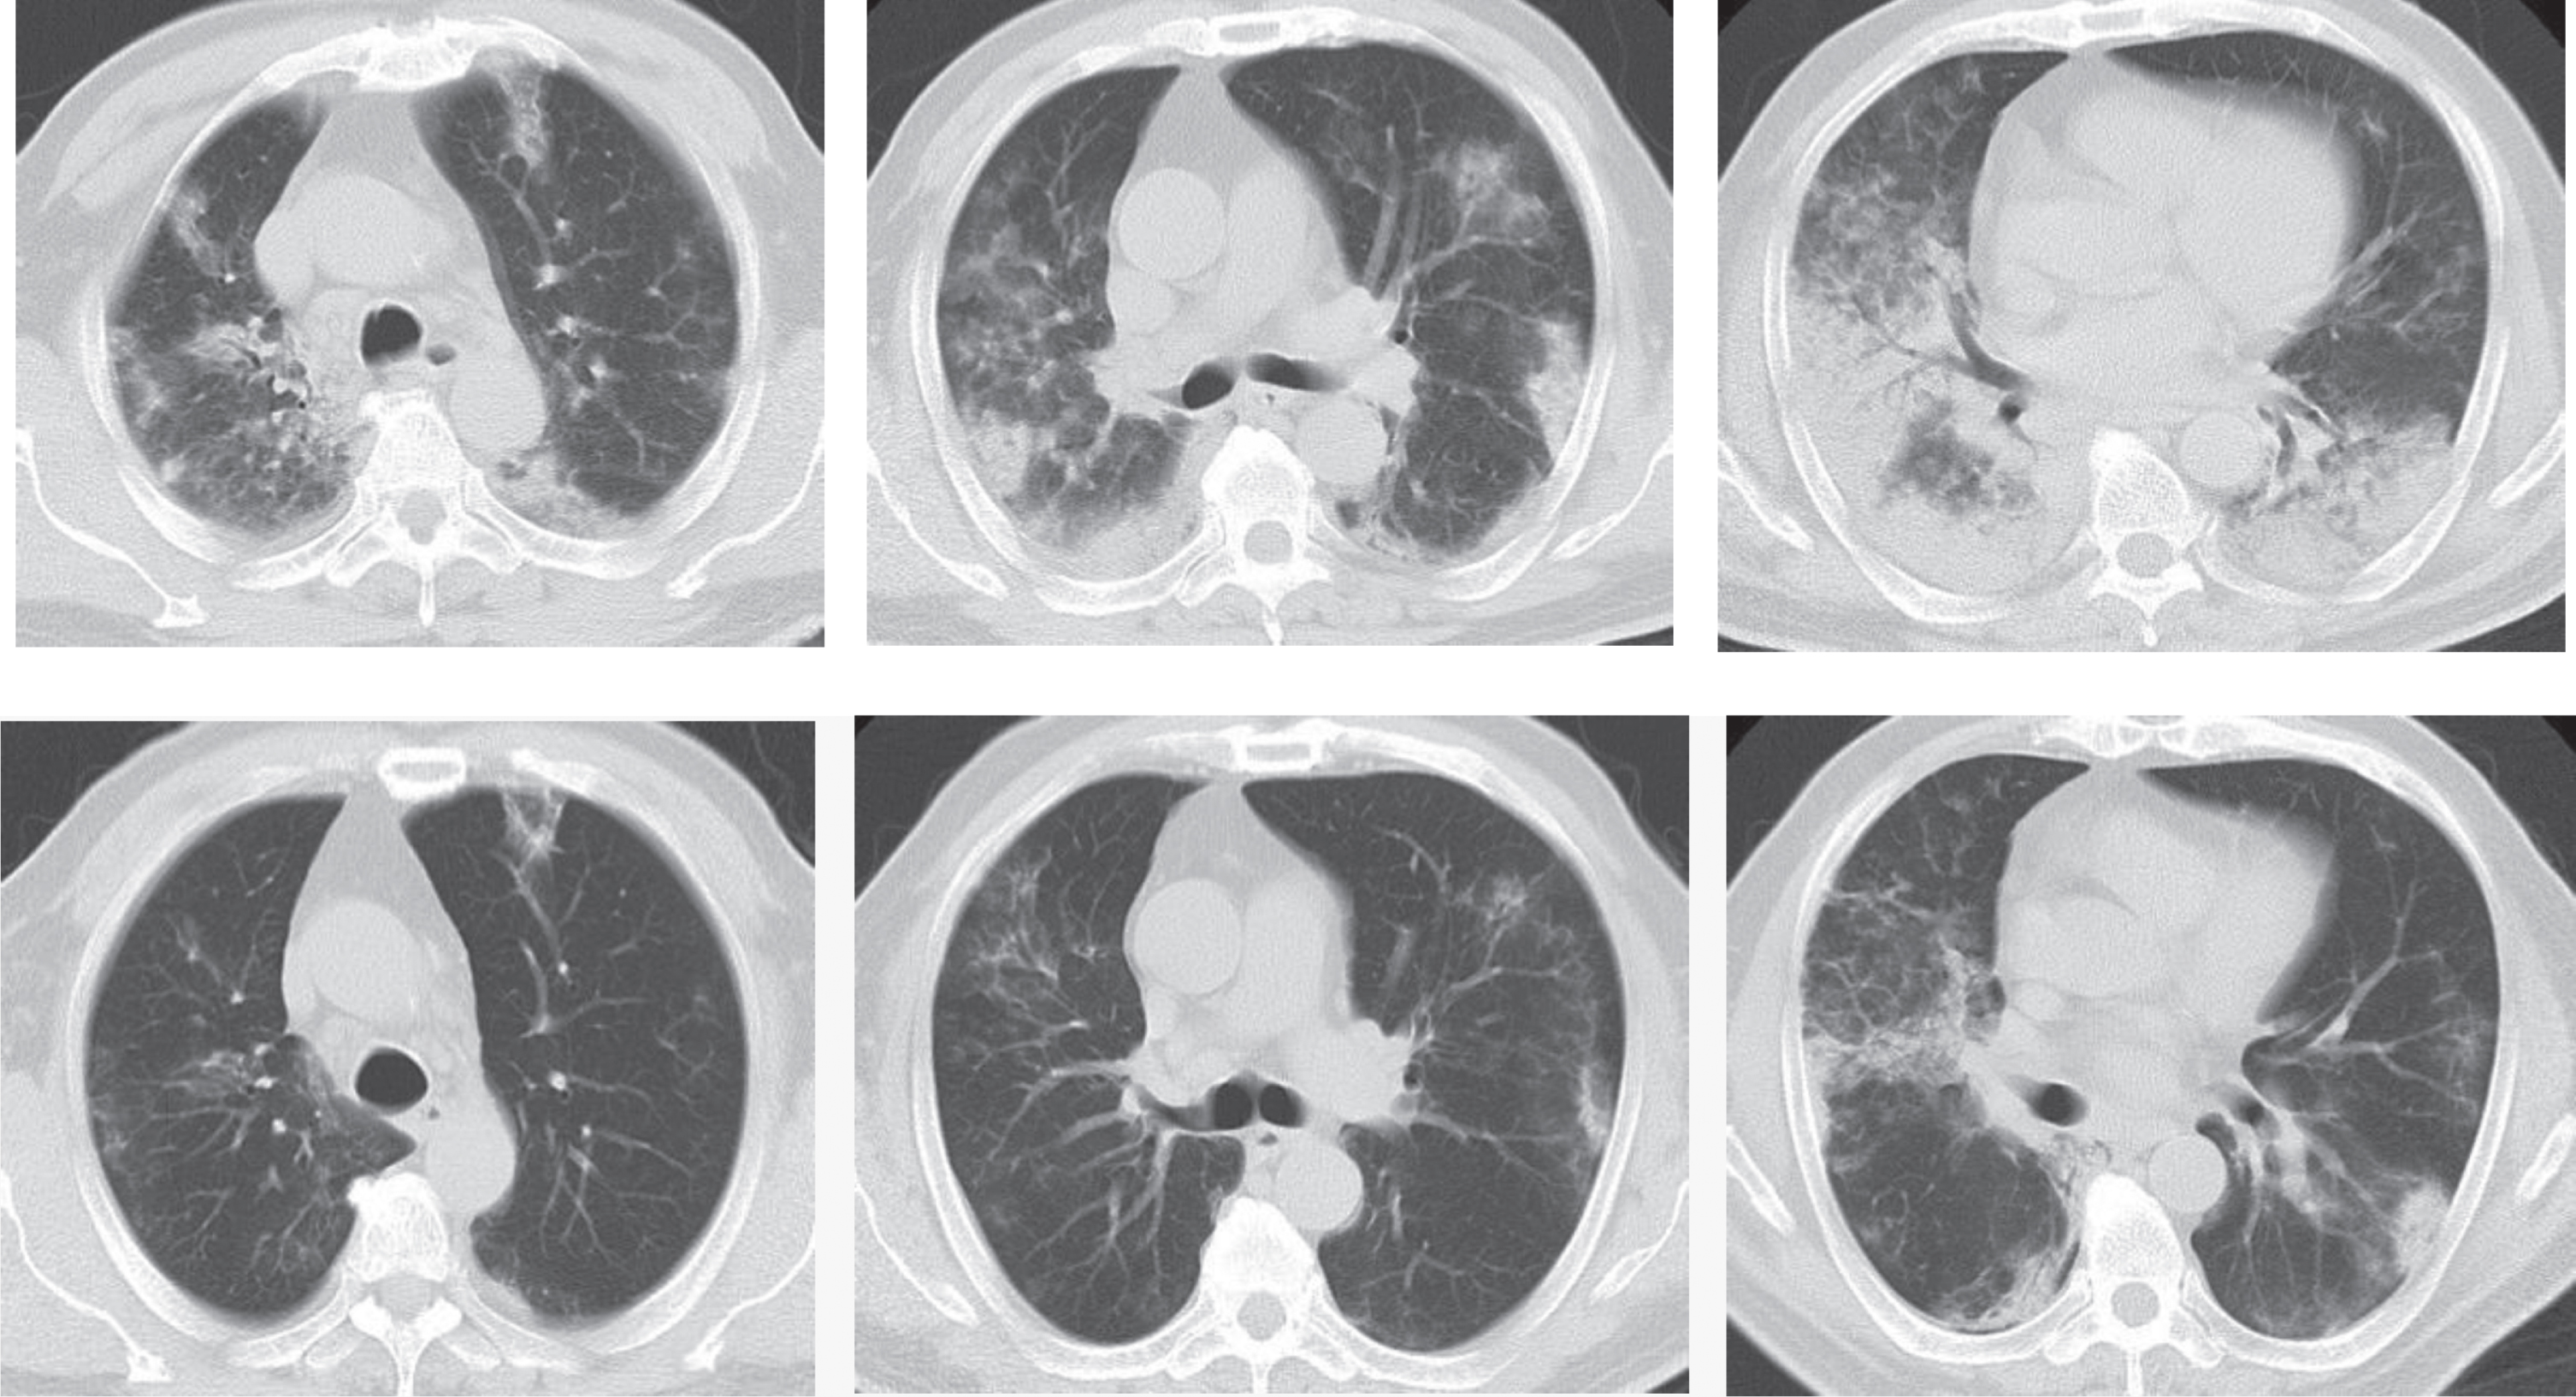 Example CT images of a 63-year-old male patient diagnosed with H7N9 avian pneumonia. Top row shows chest CT scans taken on January 17th, 2014, day 11 after the onset, in the progression phase. CT scans show patches of ground glass opacities in the upper right lung and the upper left lung, dominantly distributed in the subpleural zone. Consolidations can be seen in the lower lobes of both lungs, with air bronchogram inside dominantly at the lower right lung. Bottom row shows chest CT taken on January 24th, 2014, day 18 after the onset during the absorption period. CT shows the obvious absorption of ground glass opacities and consolidations in both lungs, which have been dominantly interstitial changes and small patches of consolidations.